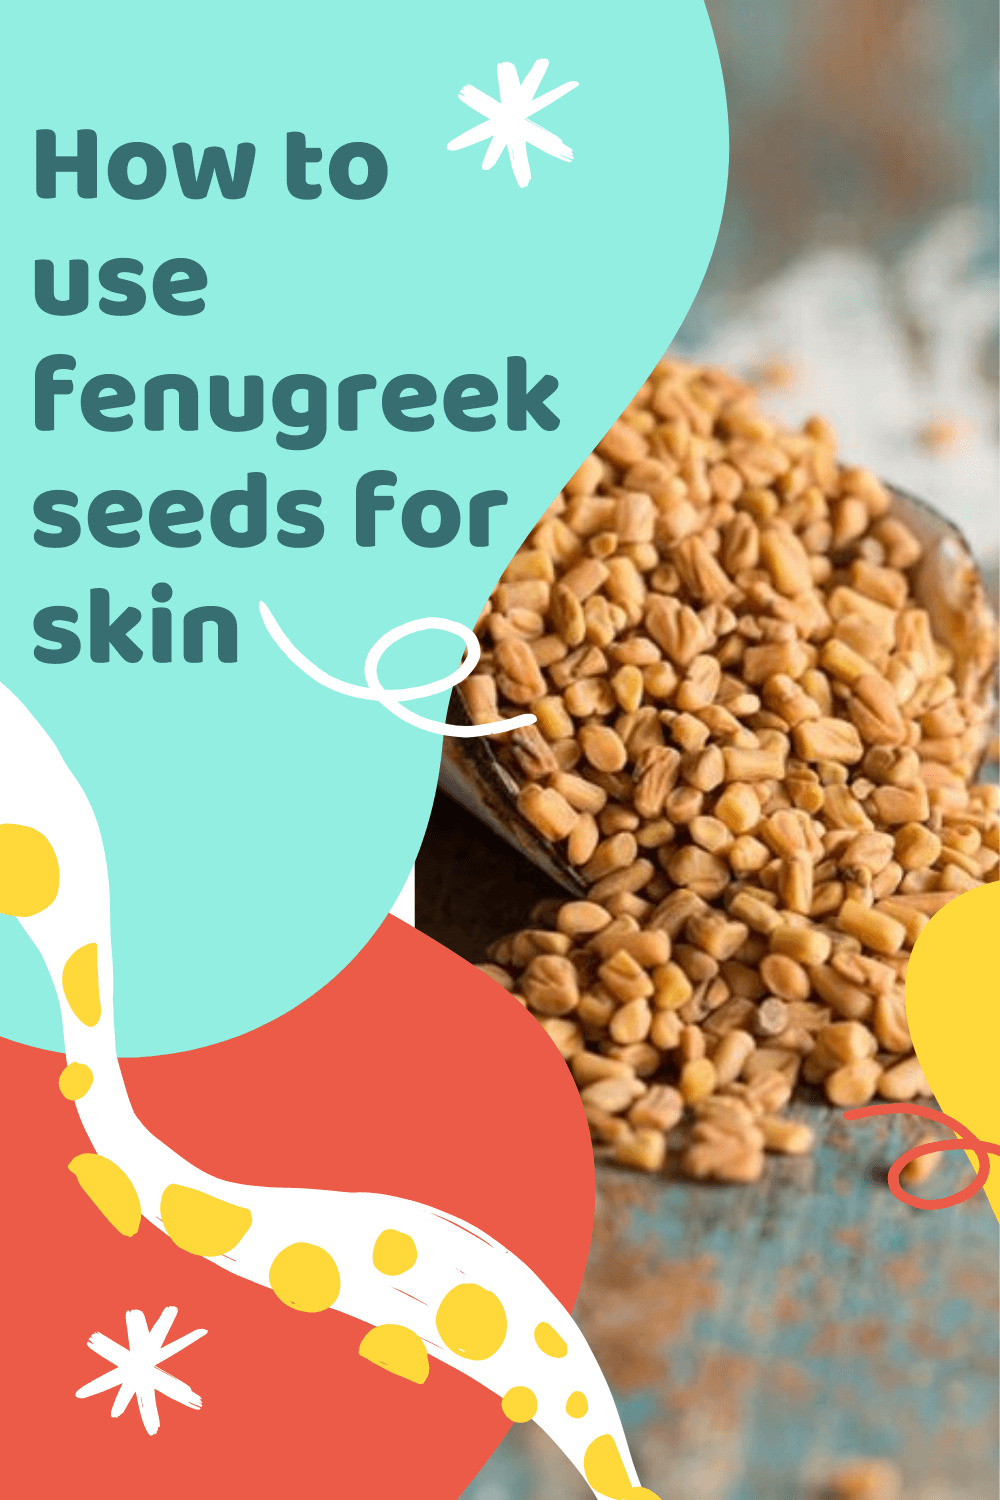 How to use fenugreek seeds for face pinterest graphic